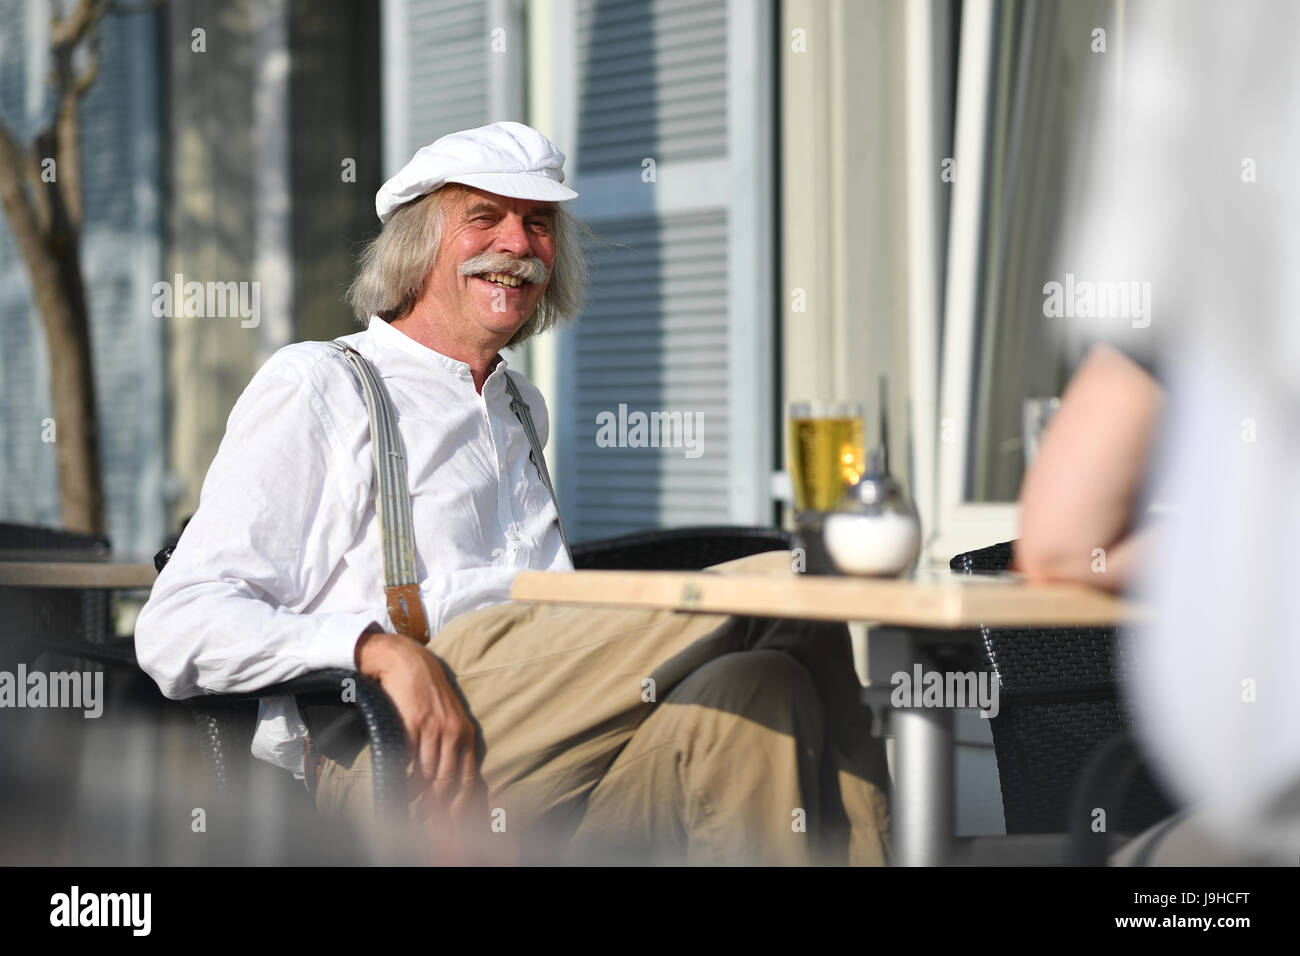 Ueberlingen, Germany. 1st June, 2017. Artist Peter Lenk, photographed at a restaurant in Ueberlingen, Germany, 1 June 2017. The exhibition 'Peter Lenk - 40 Jahre Zoff und Zwinkern' (lit. '40 years of trouble and winking') at the 'Staedtische Galerie' is open from 2 June until 15 October 2017. Photo: Felix Kästle/dpa/Alamy Live News Stock Photo